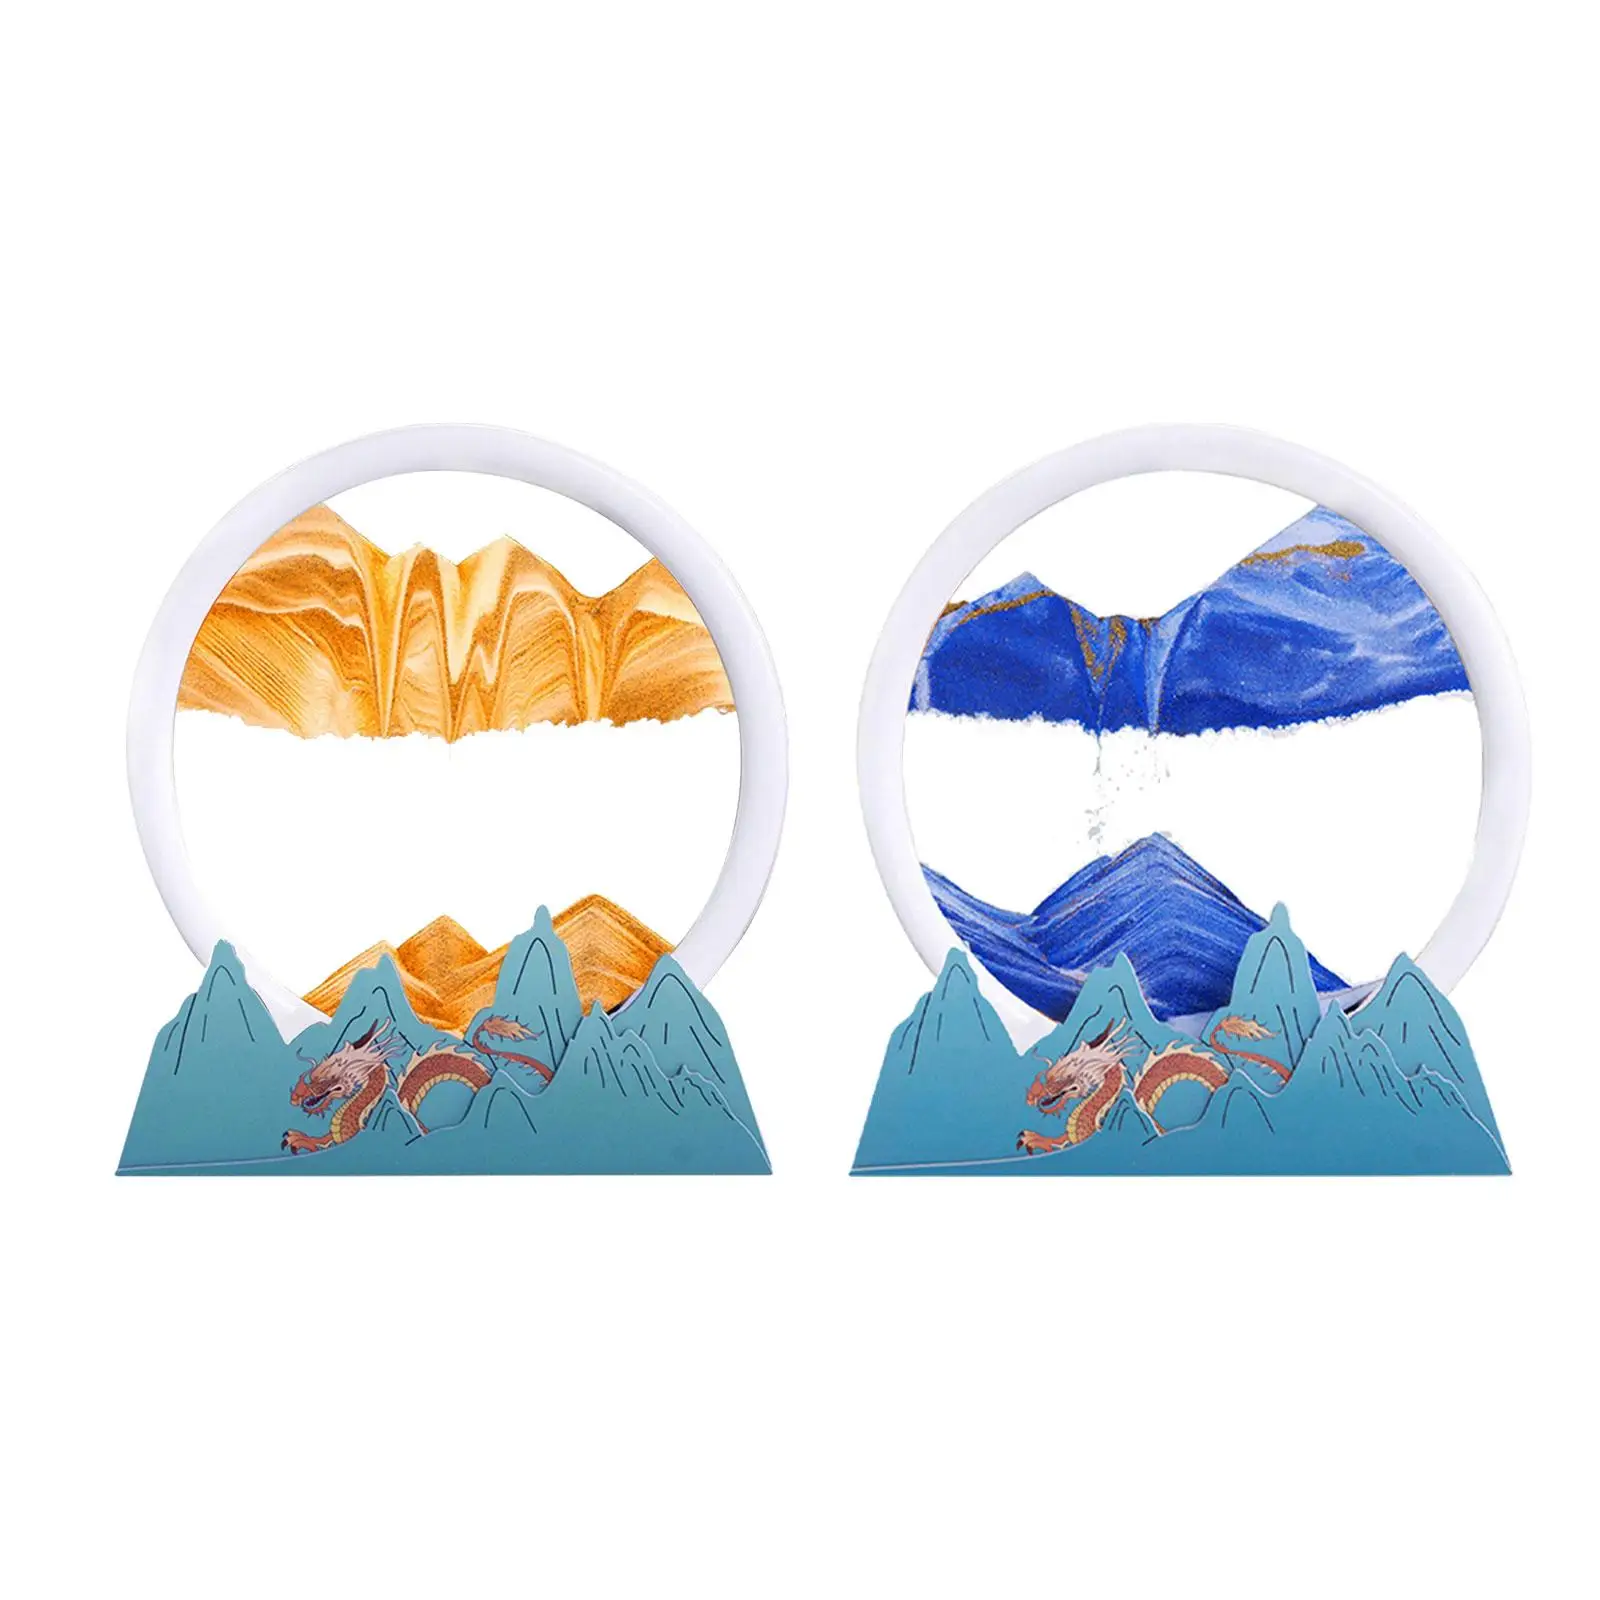 

3D Moving Sand Art Picture Decor Round Glass Relaxing Gift Flowing Sand Painting for Bedroom Bar Bookshelves Water Desk Office